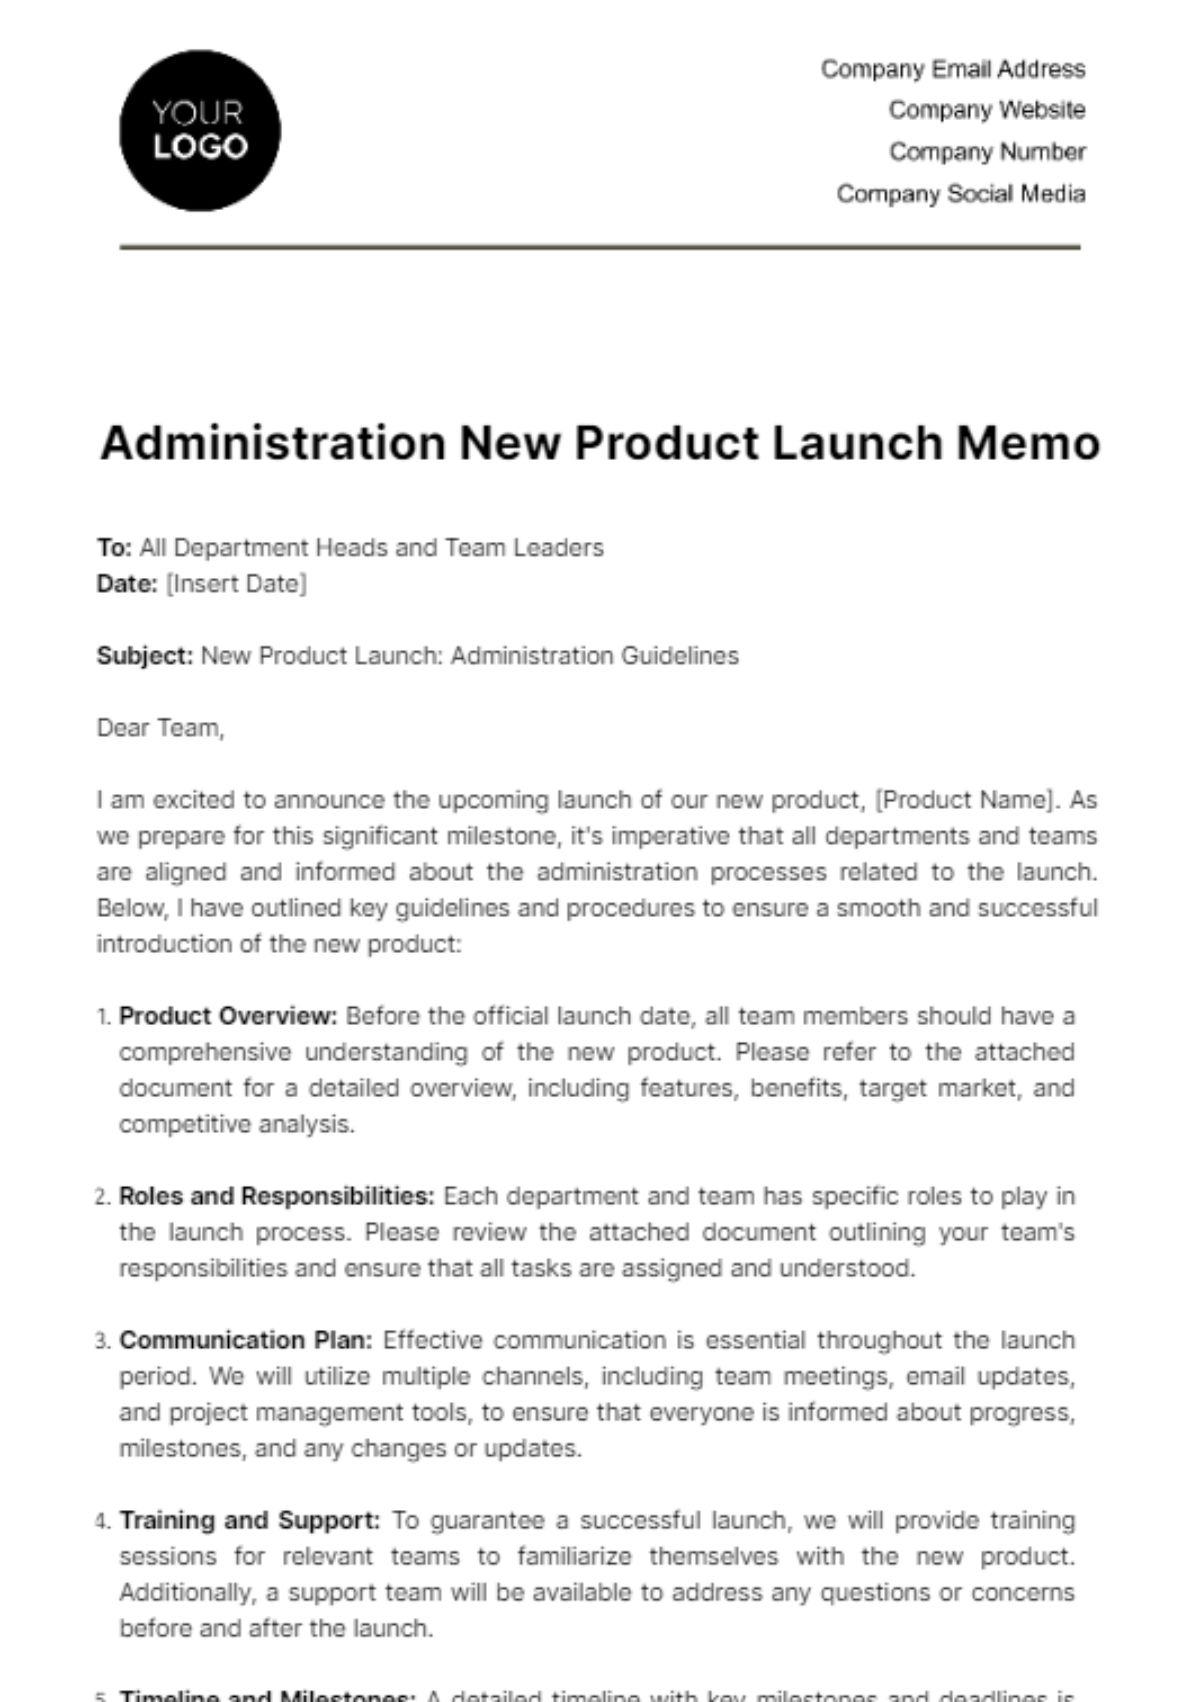 Administration New Product Launch Memo Template